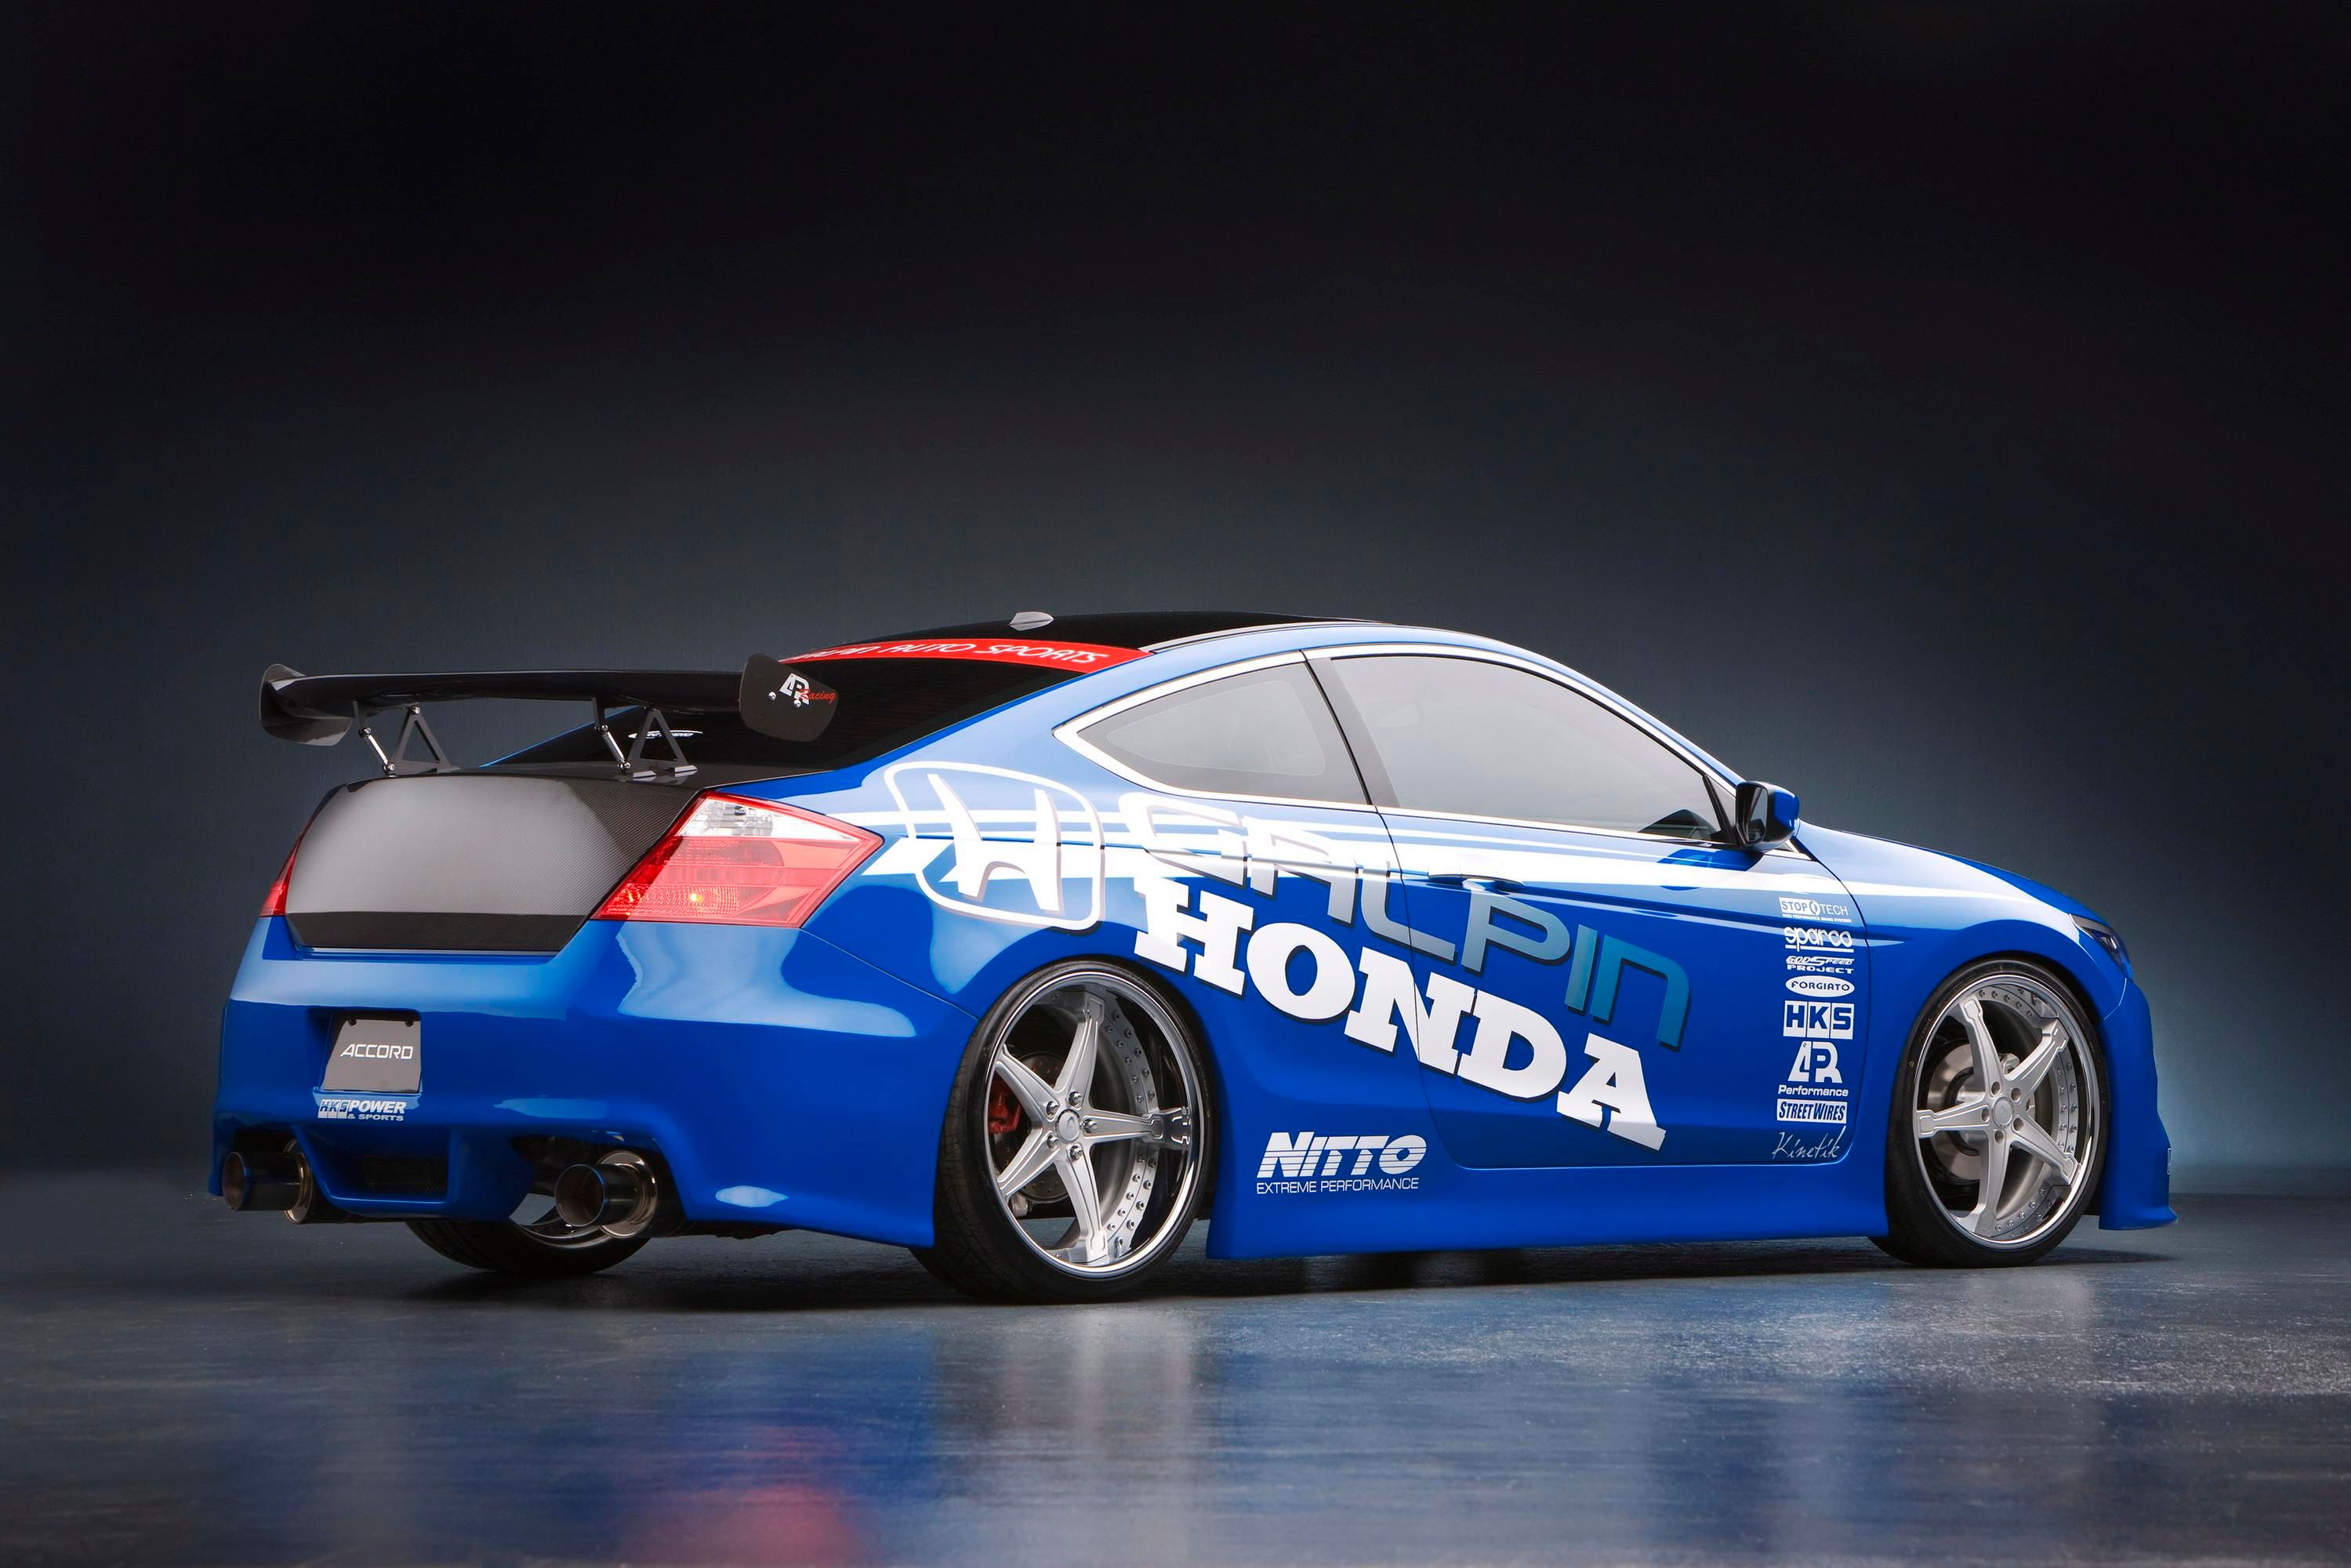 2008 Honda Accord Coupe by Galpin